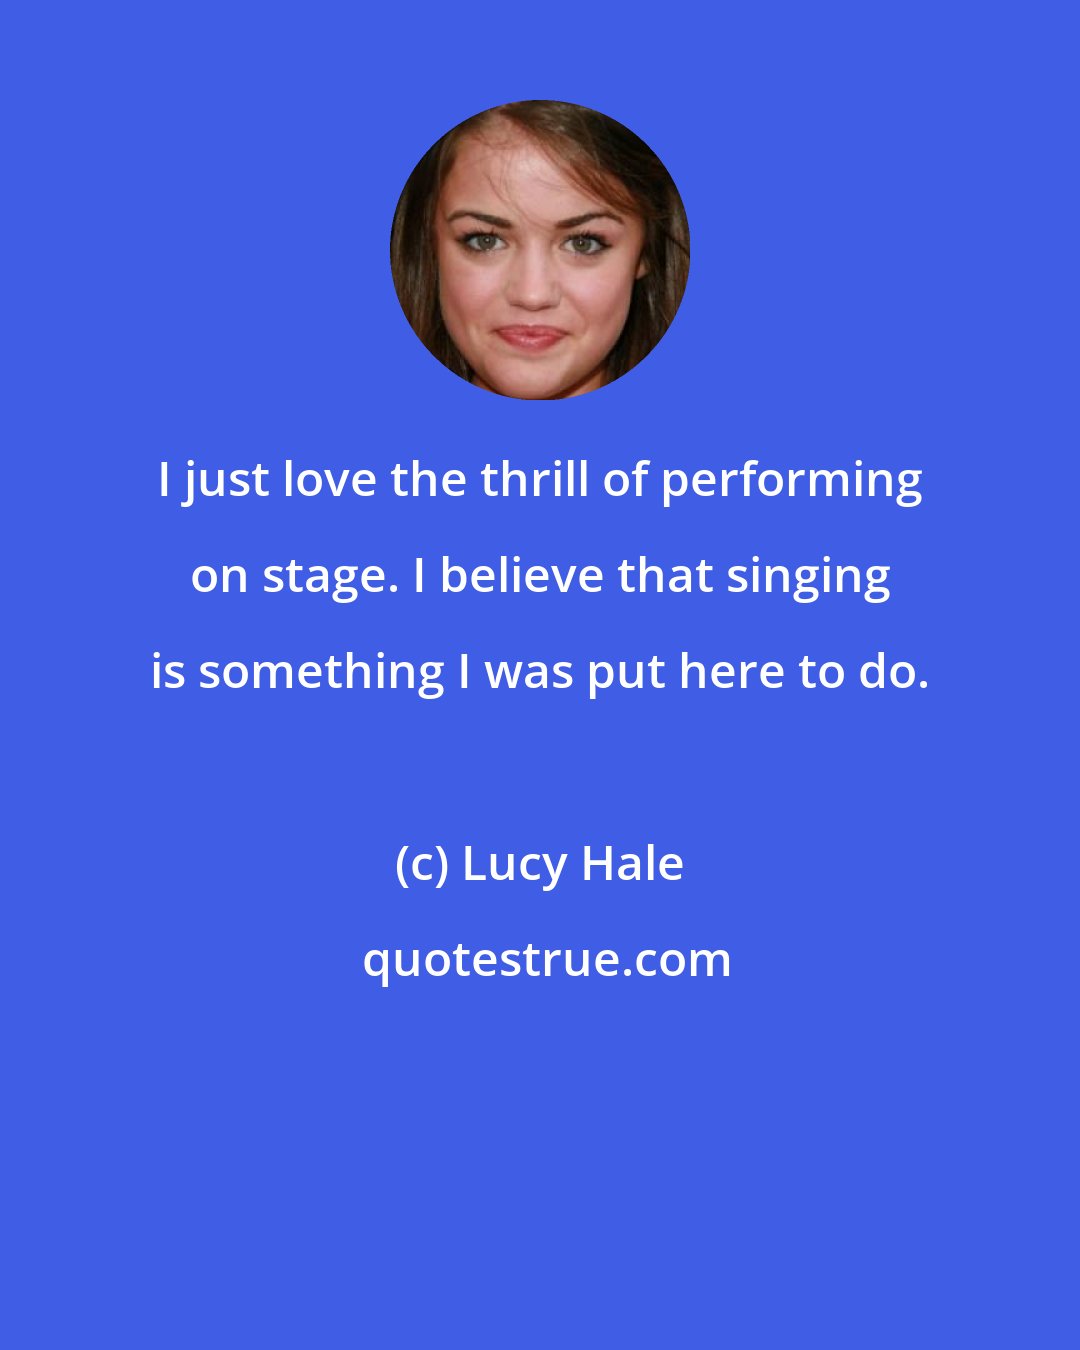 Lucy Hale: I just love the thrill of performing on stage. I believe that singing is something I was put here to do.